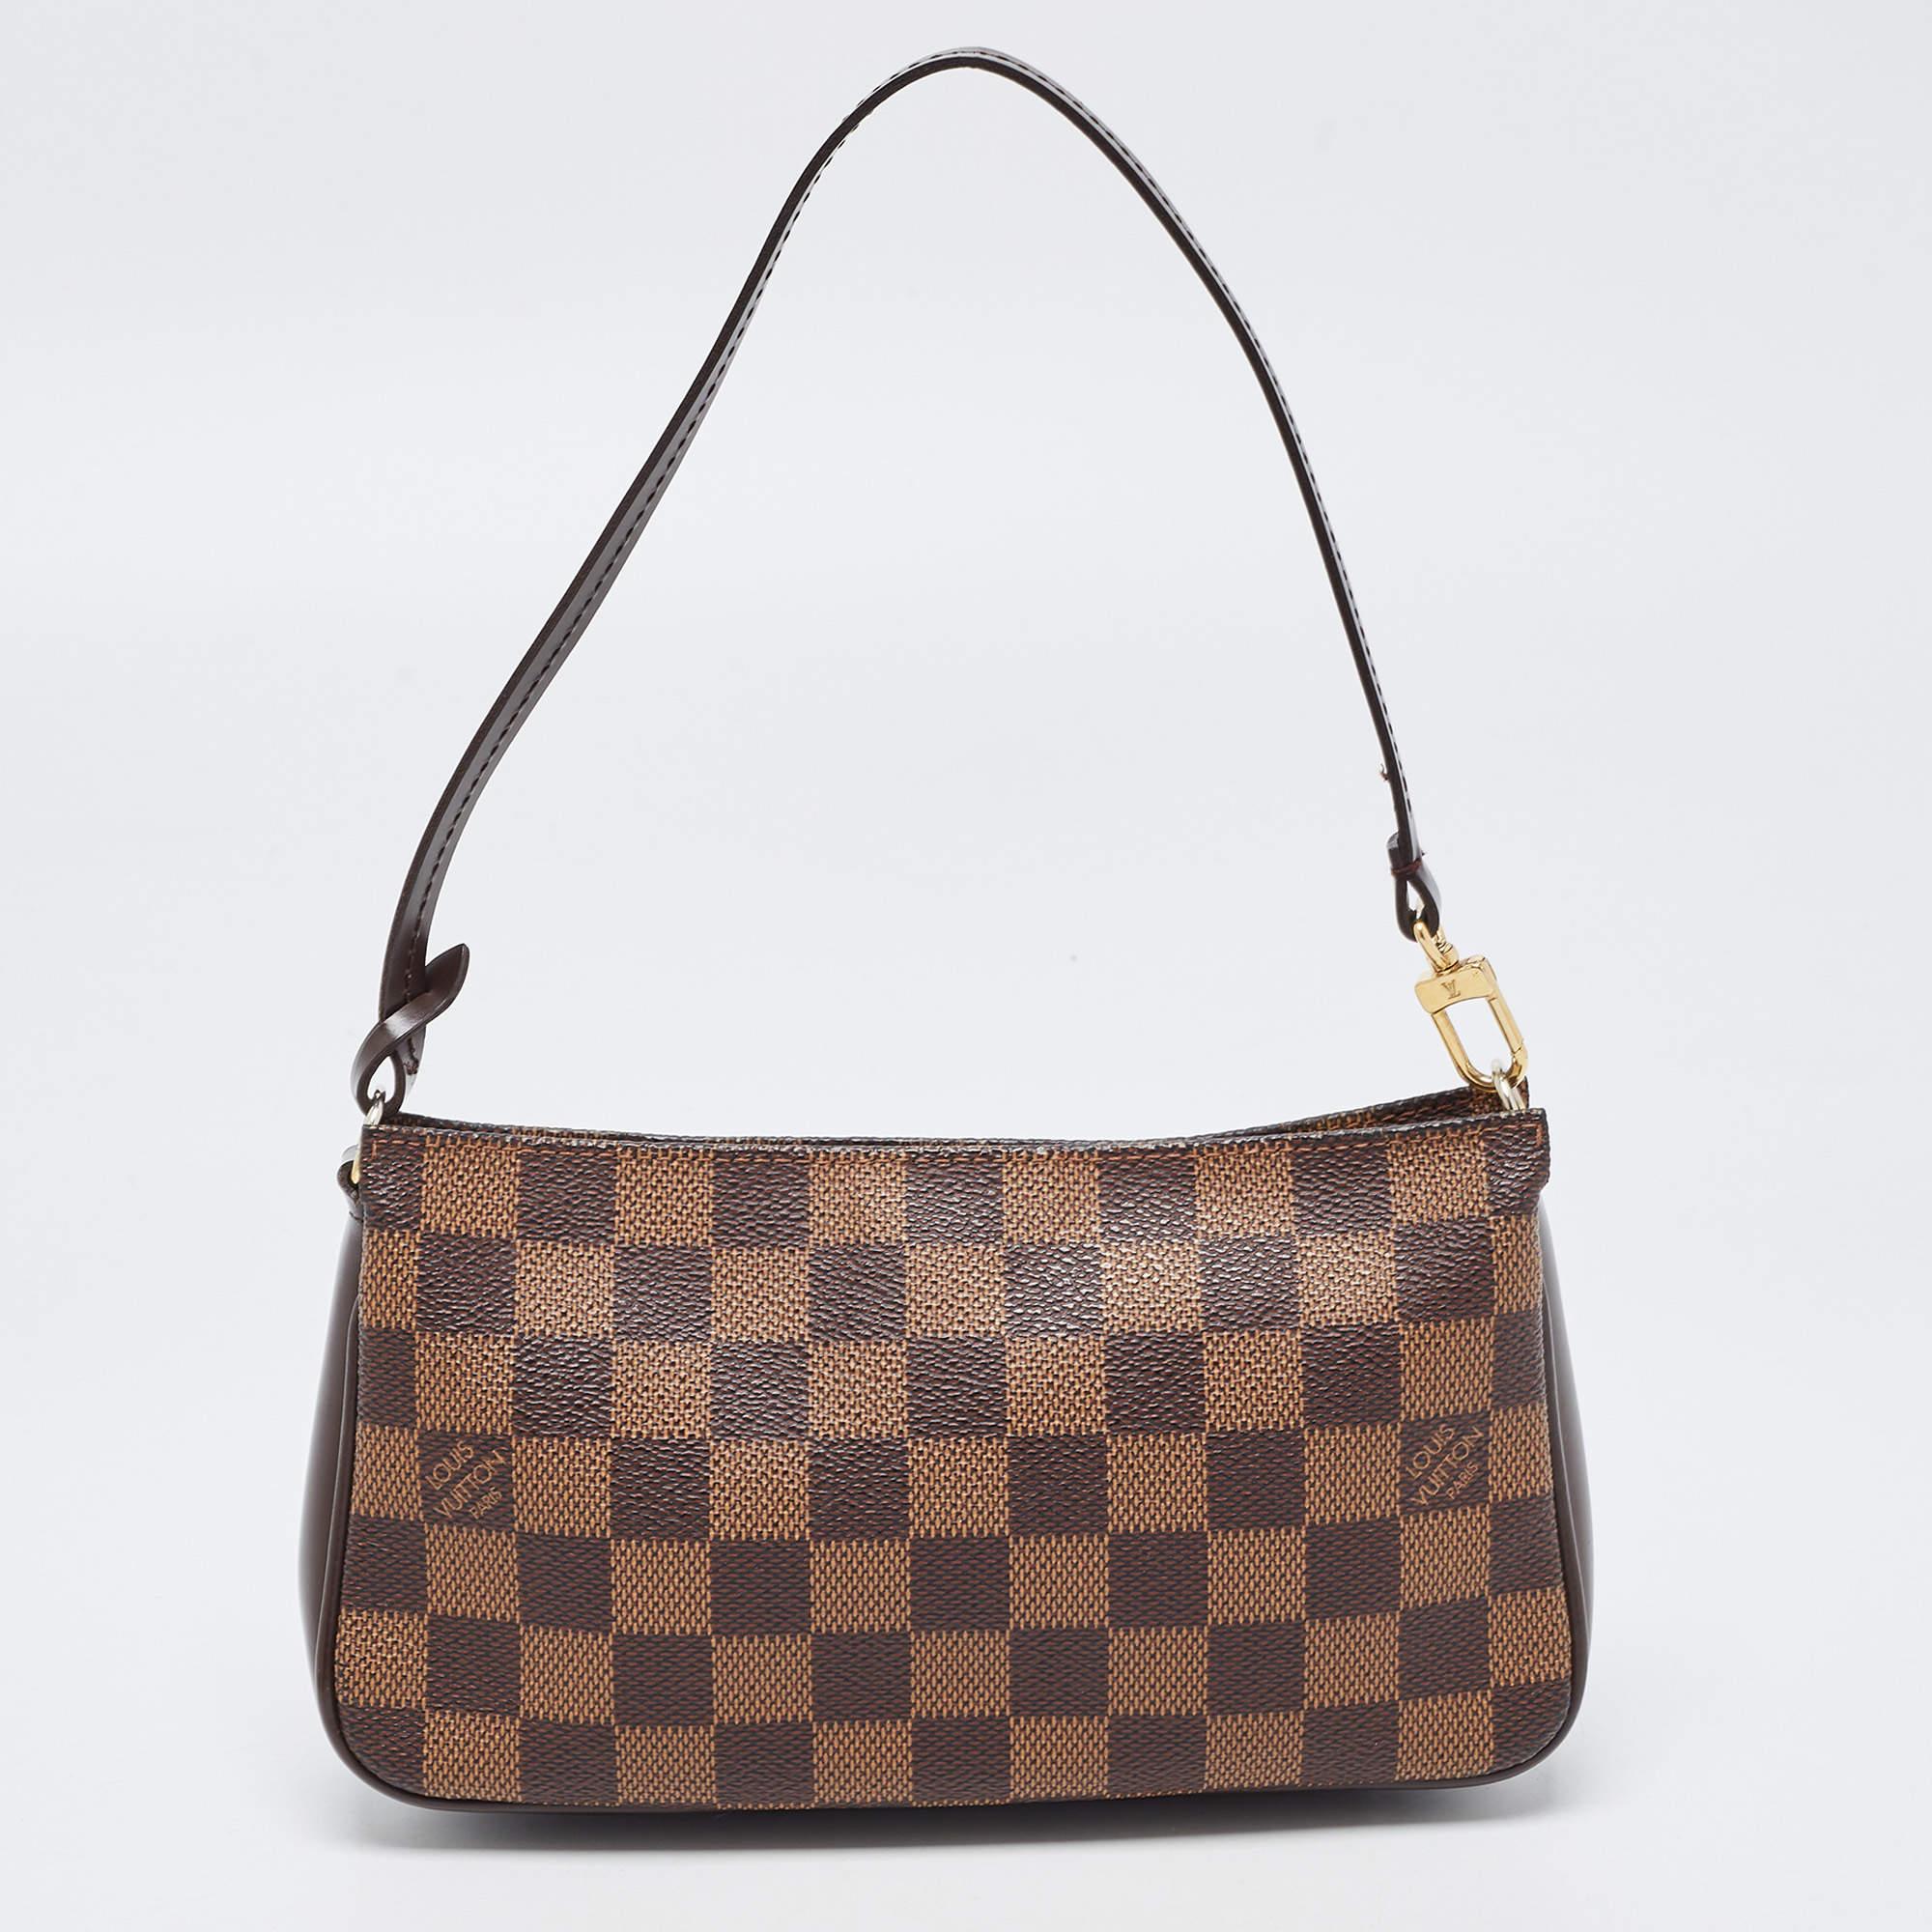 The simple silhouette and the use of durable materials for the exterior bring out the appeal of this LV pochette for women. It has a single handle and a zip-enclosed interior.

Includes: Original Dustbag

